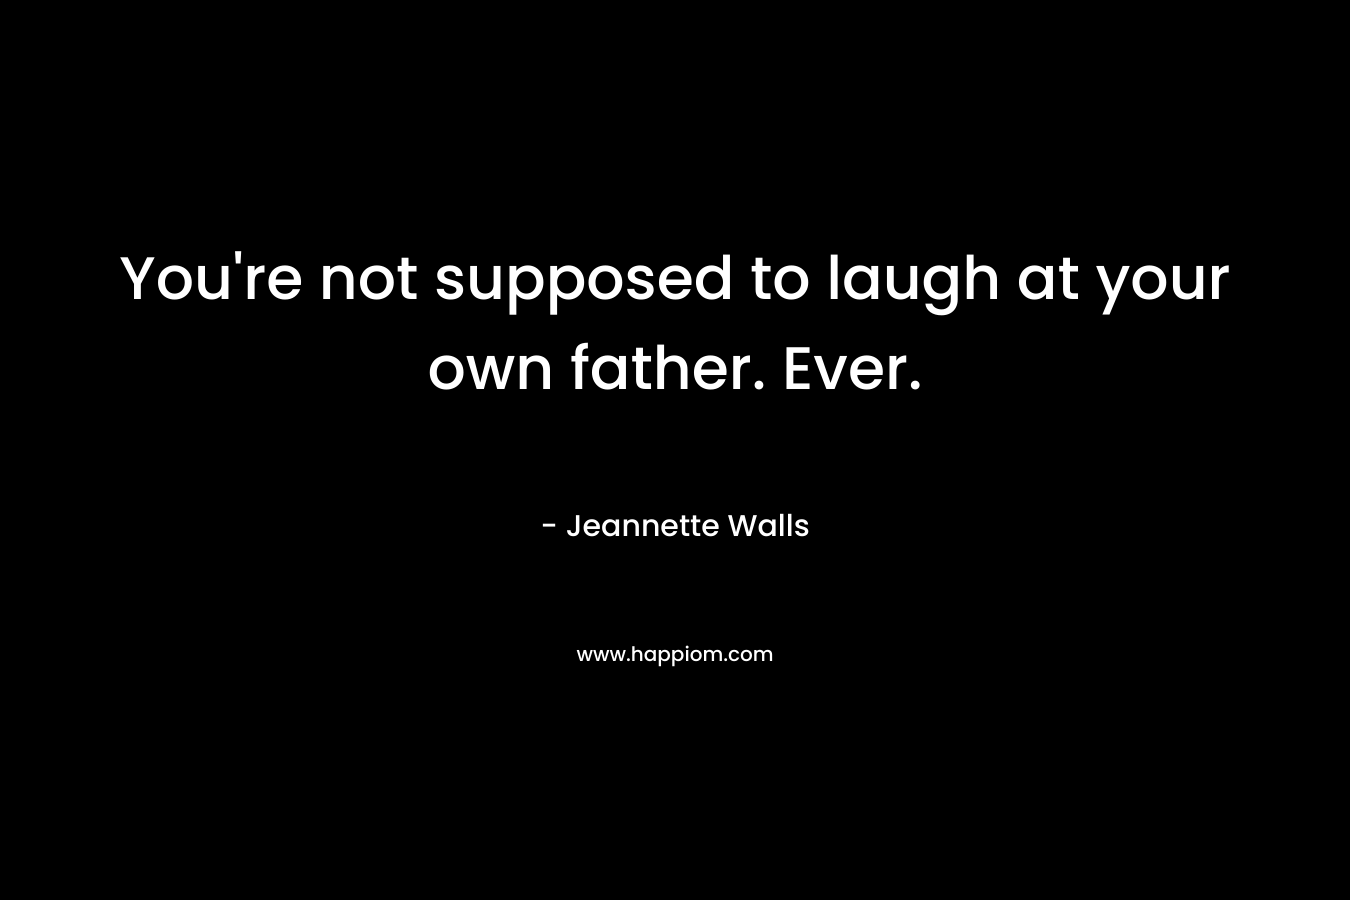 You’re not supposed to laugh at your own father. Ever. – Jeannette Walls